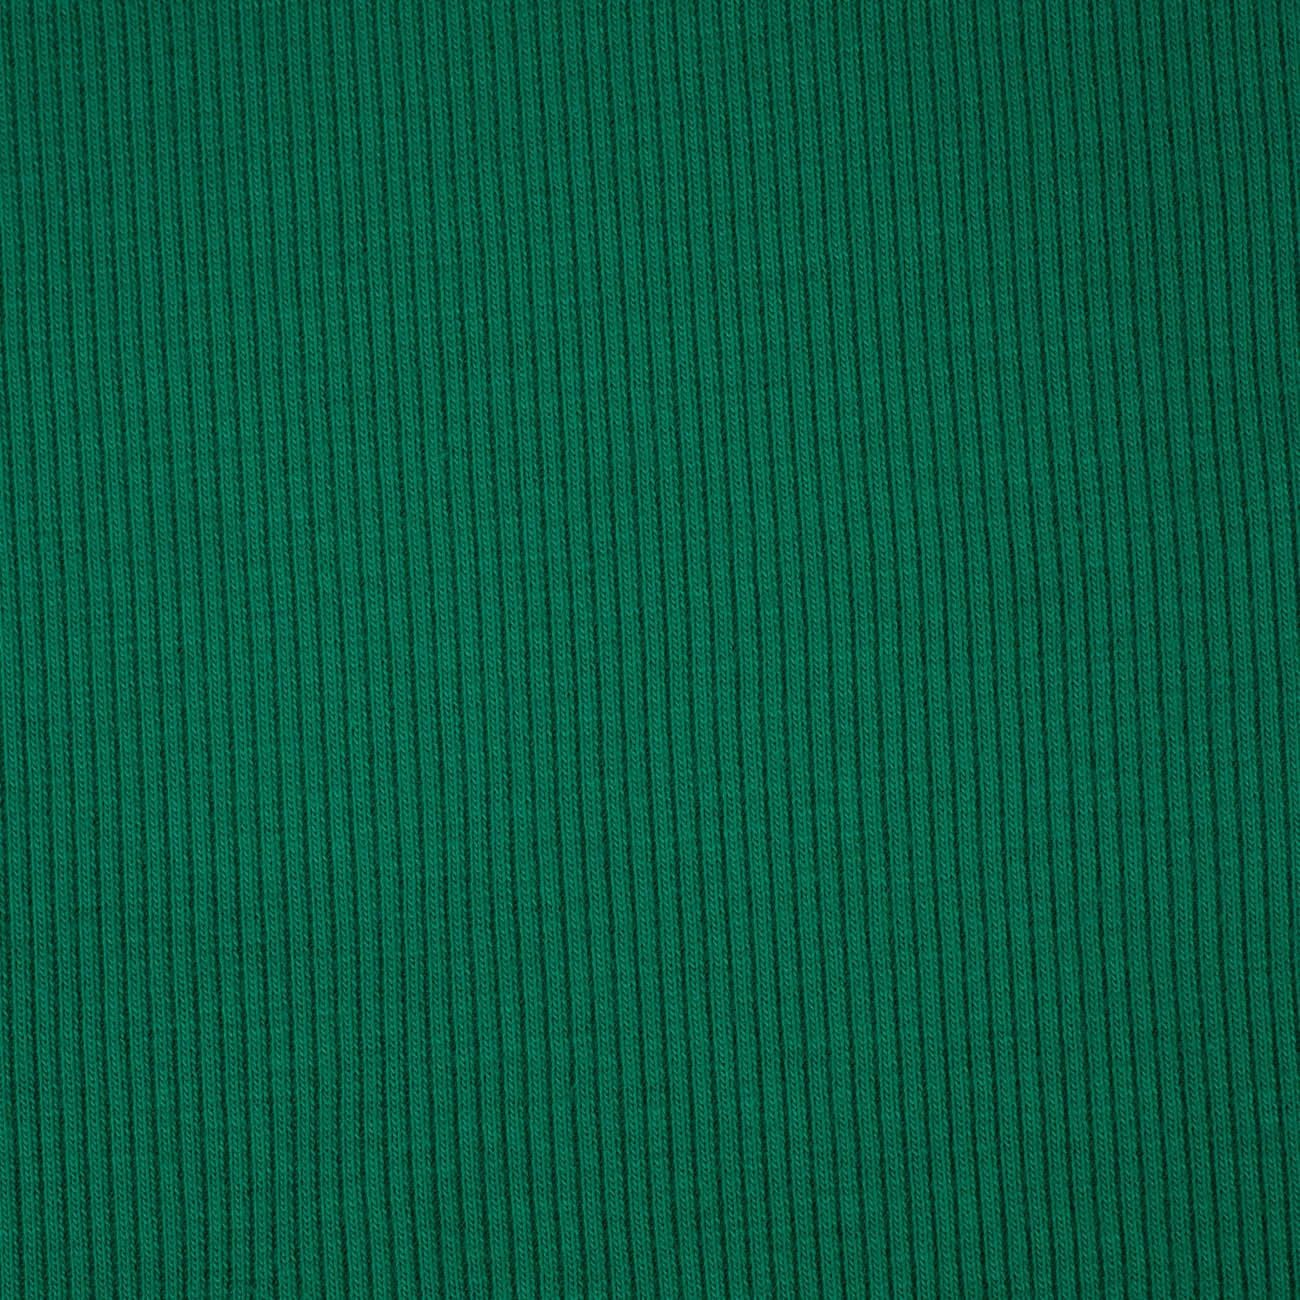 D-82 LUSH MEADOW - Ribbed knit fabric